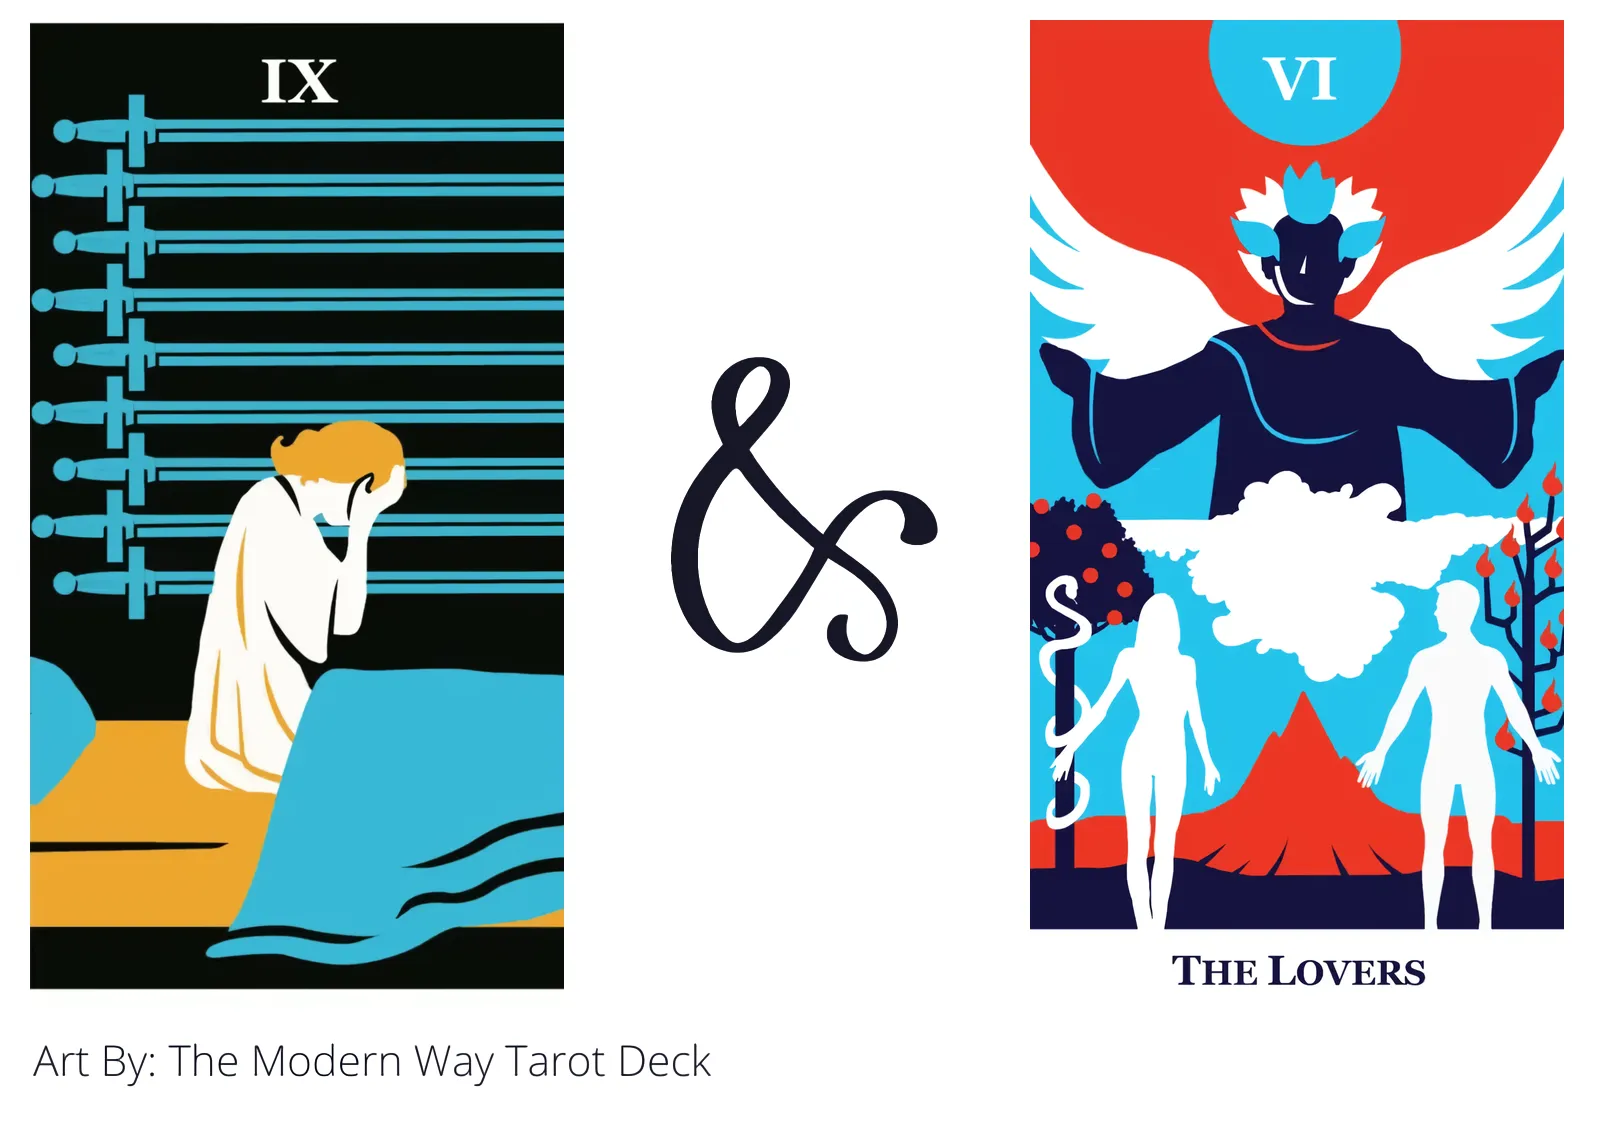 nine of swords and the lovers tarot cards together